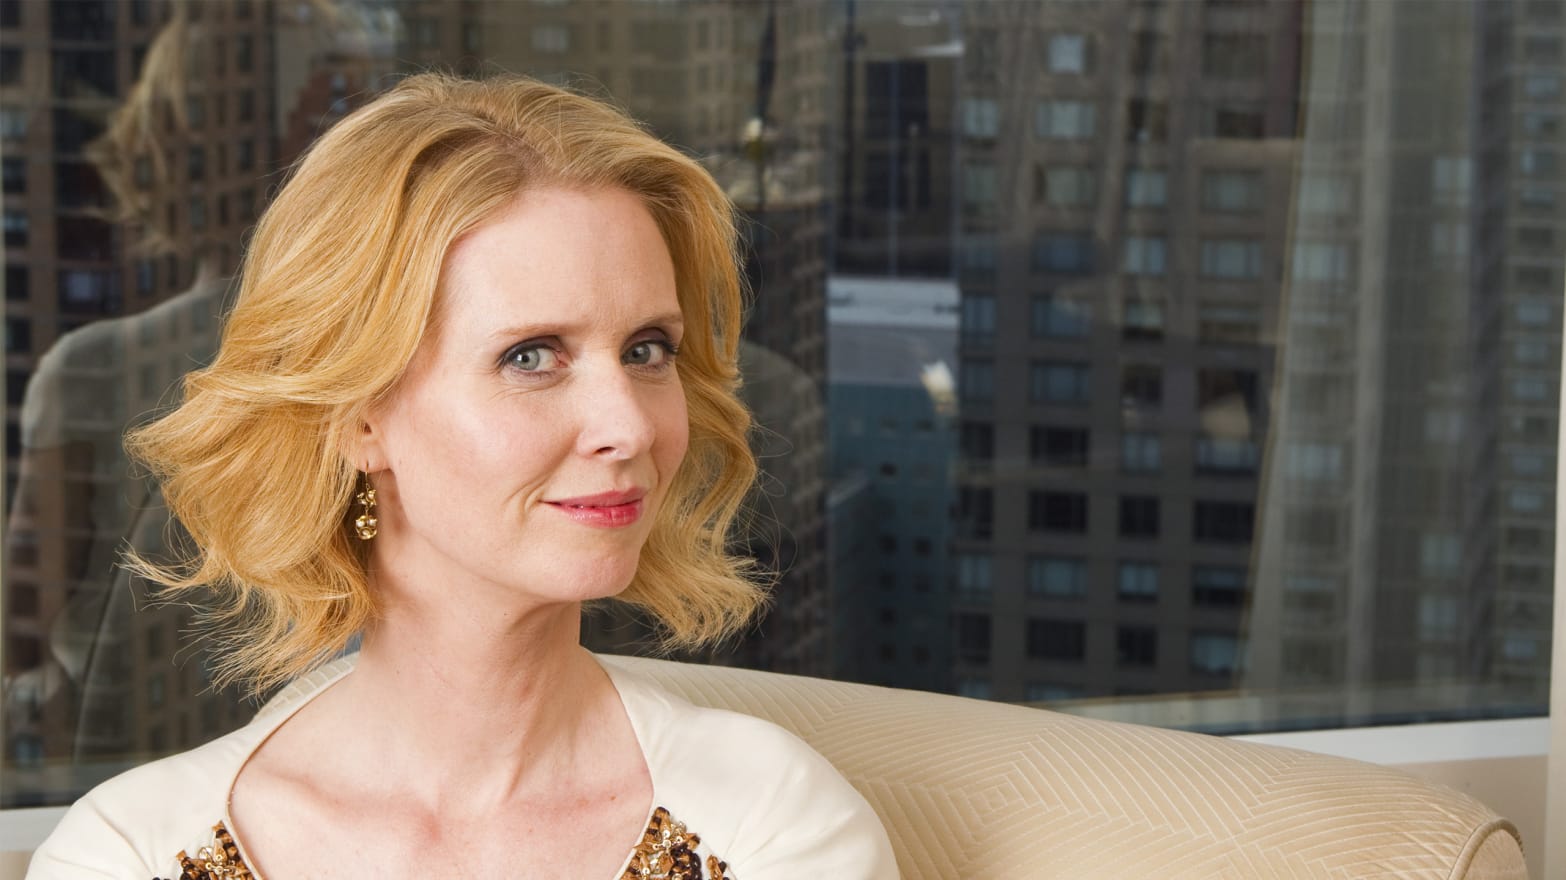 Why Cynthia Nixon Played a Cancer Patient After Her Mom's Cancer Death